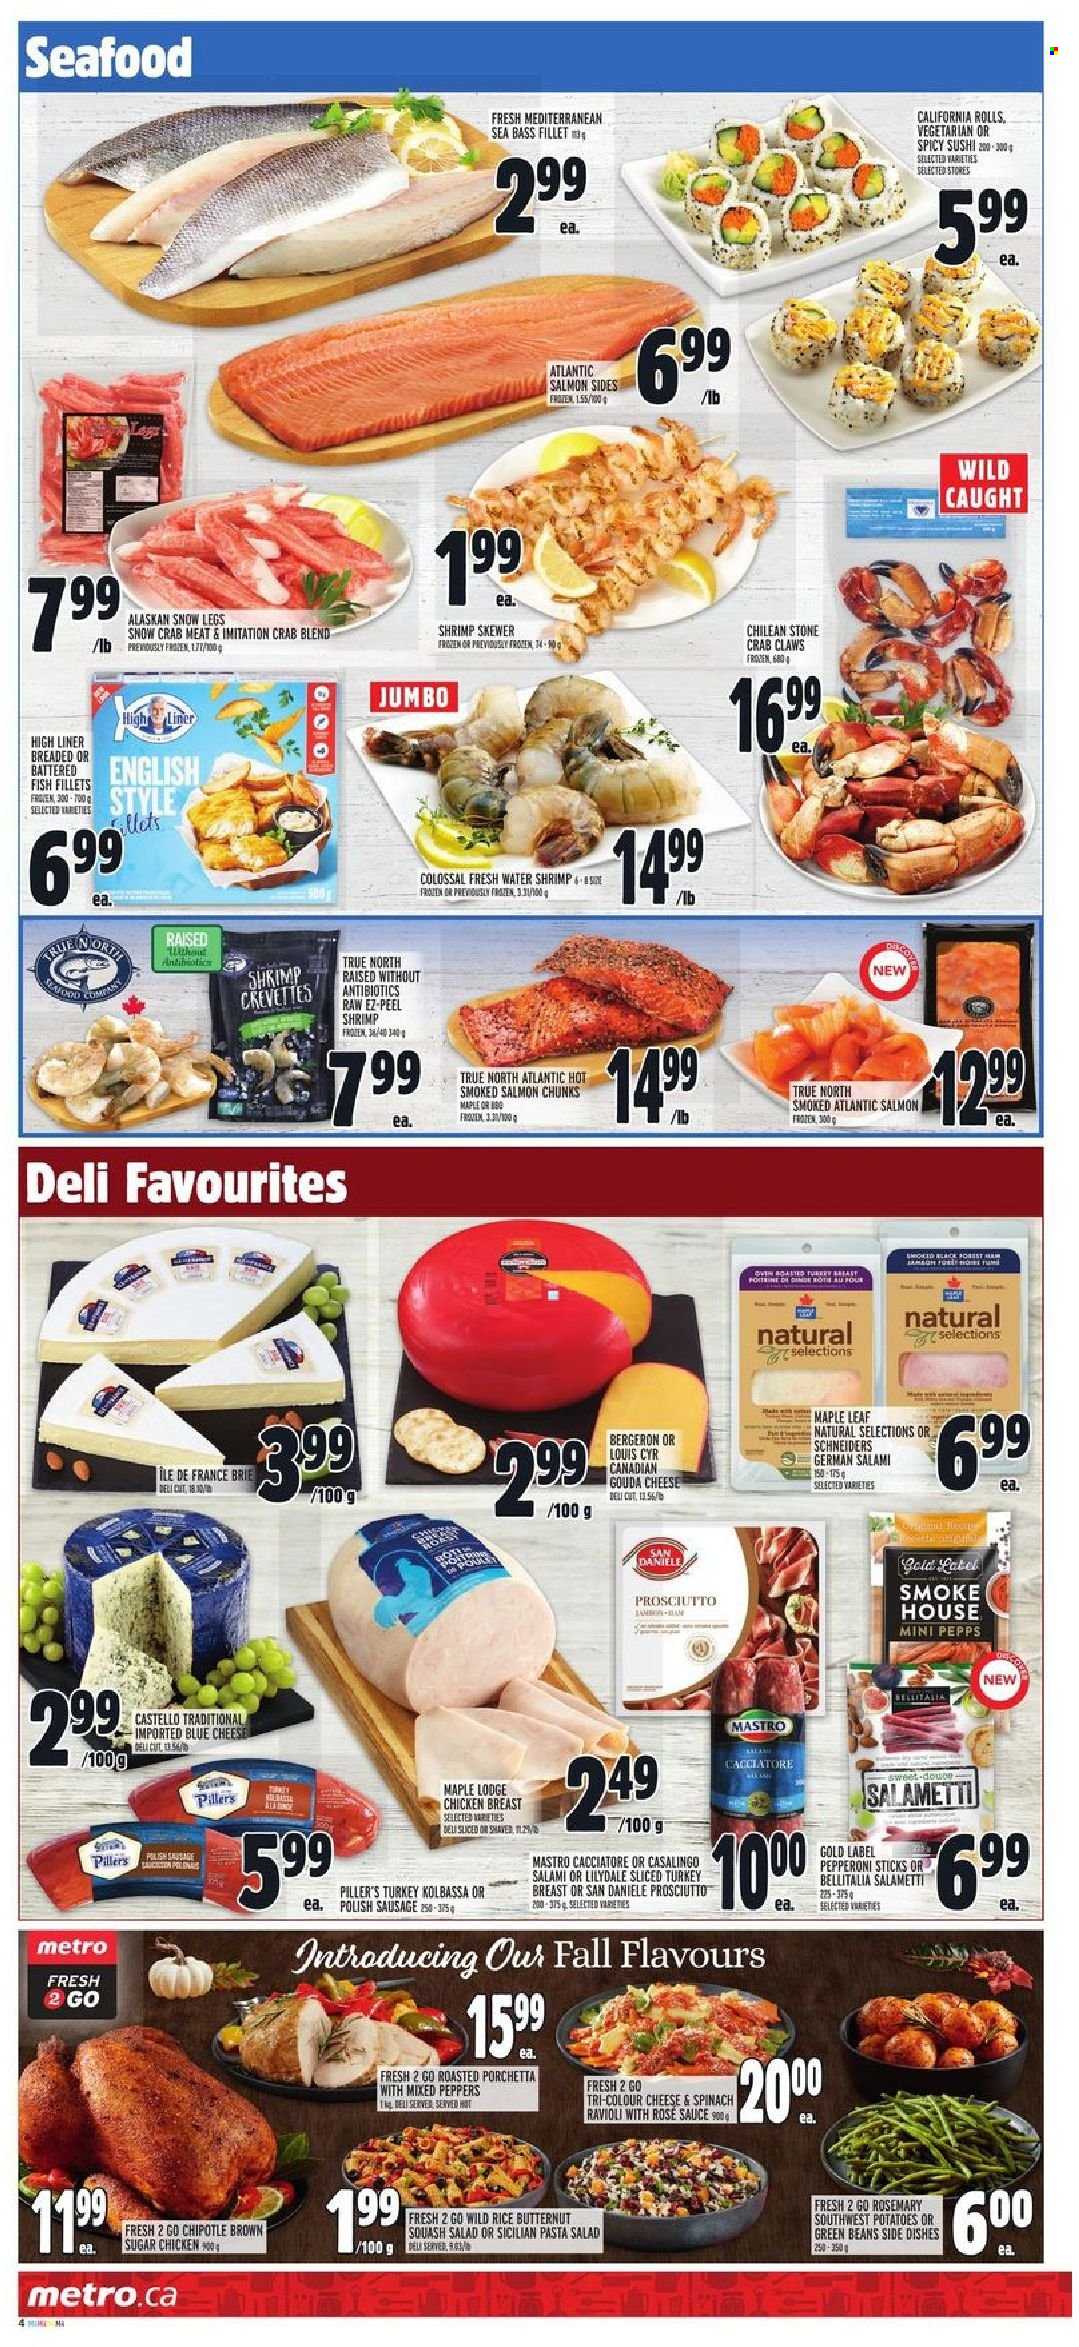 thumbnail - Metro Flyer - October 21, 2021 - October 27, 2021 - Sales products - beans, butternut squash, green beans, potatoes, peppers, crab meat, fish fillets, salmon, sea bass, smoked salmon, seafood, crab, fish, shrimps, ravioli, pasta, sauce, salami, sliced turkey, prosciutto, sausage, polish sausage, pepperoni, pasta salad, blue cheese, gouda, brie, cane sugar, rice, rosemary, rosé wine, turkey breast, chicken, turkey, shaver, rose. Page 4.